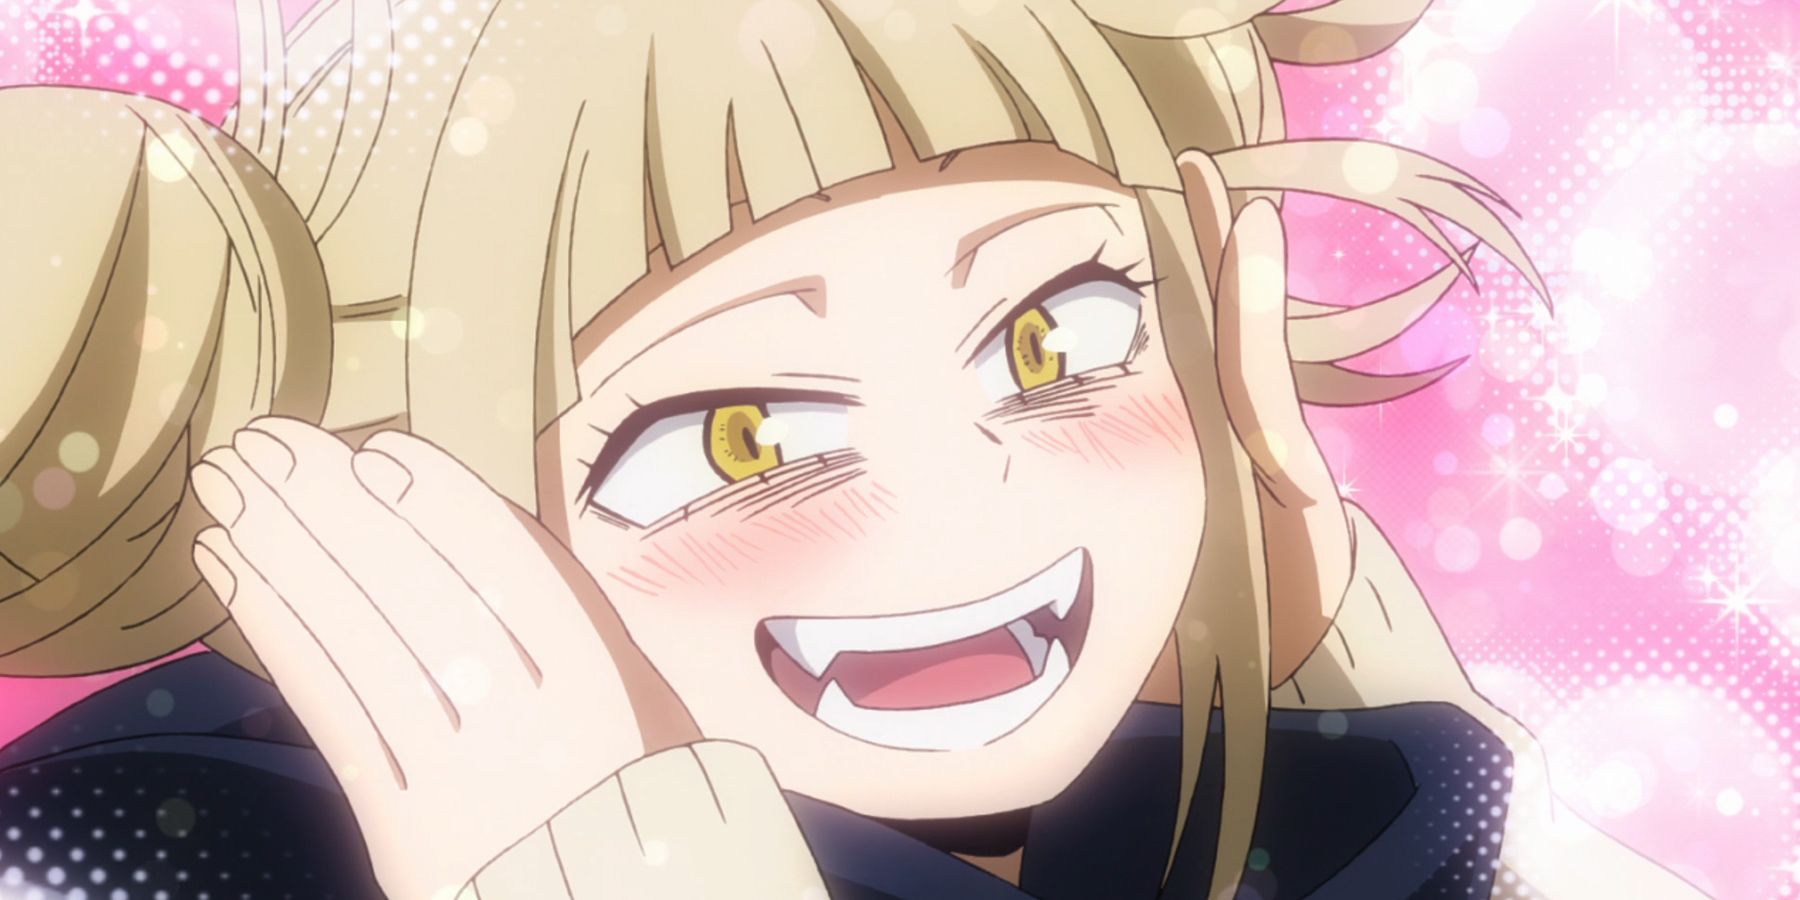 himiko toga from my hero academia smiling happily